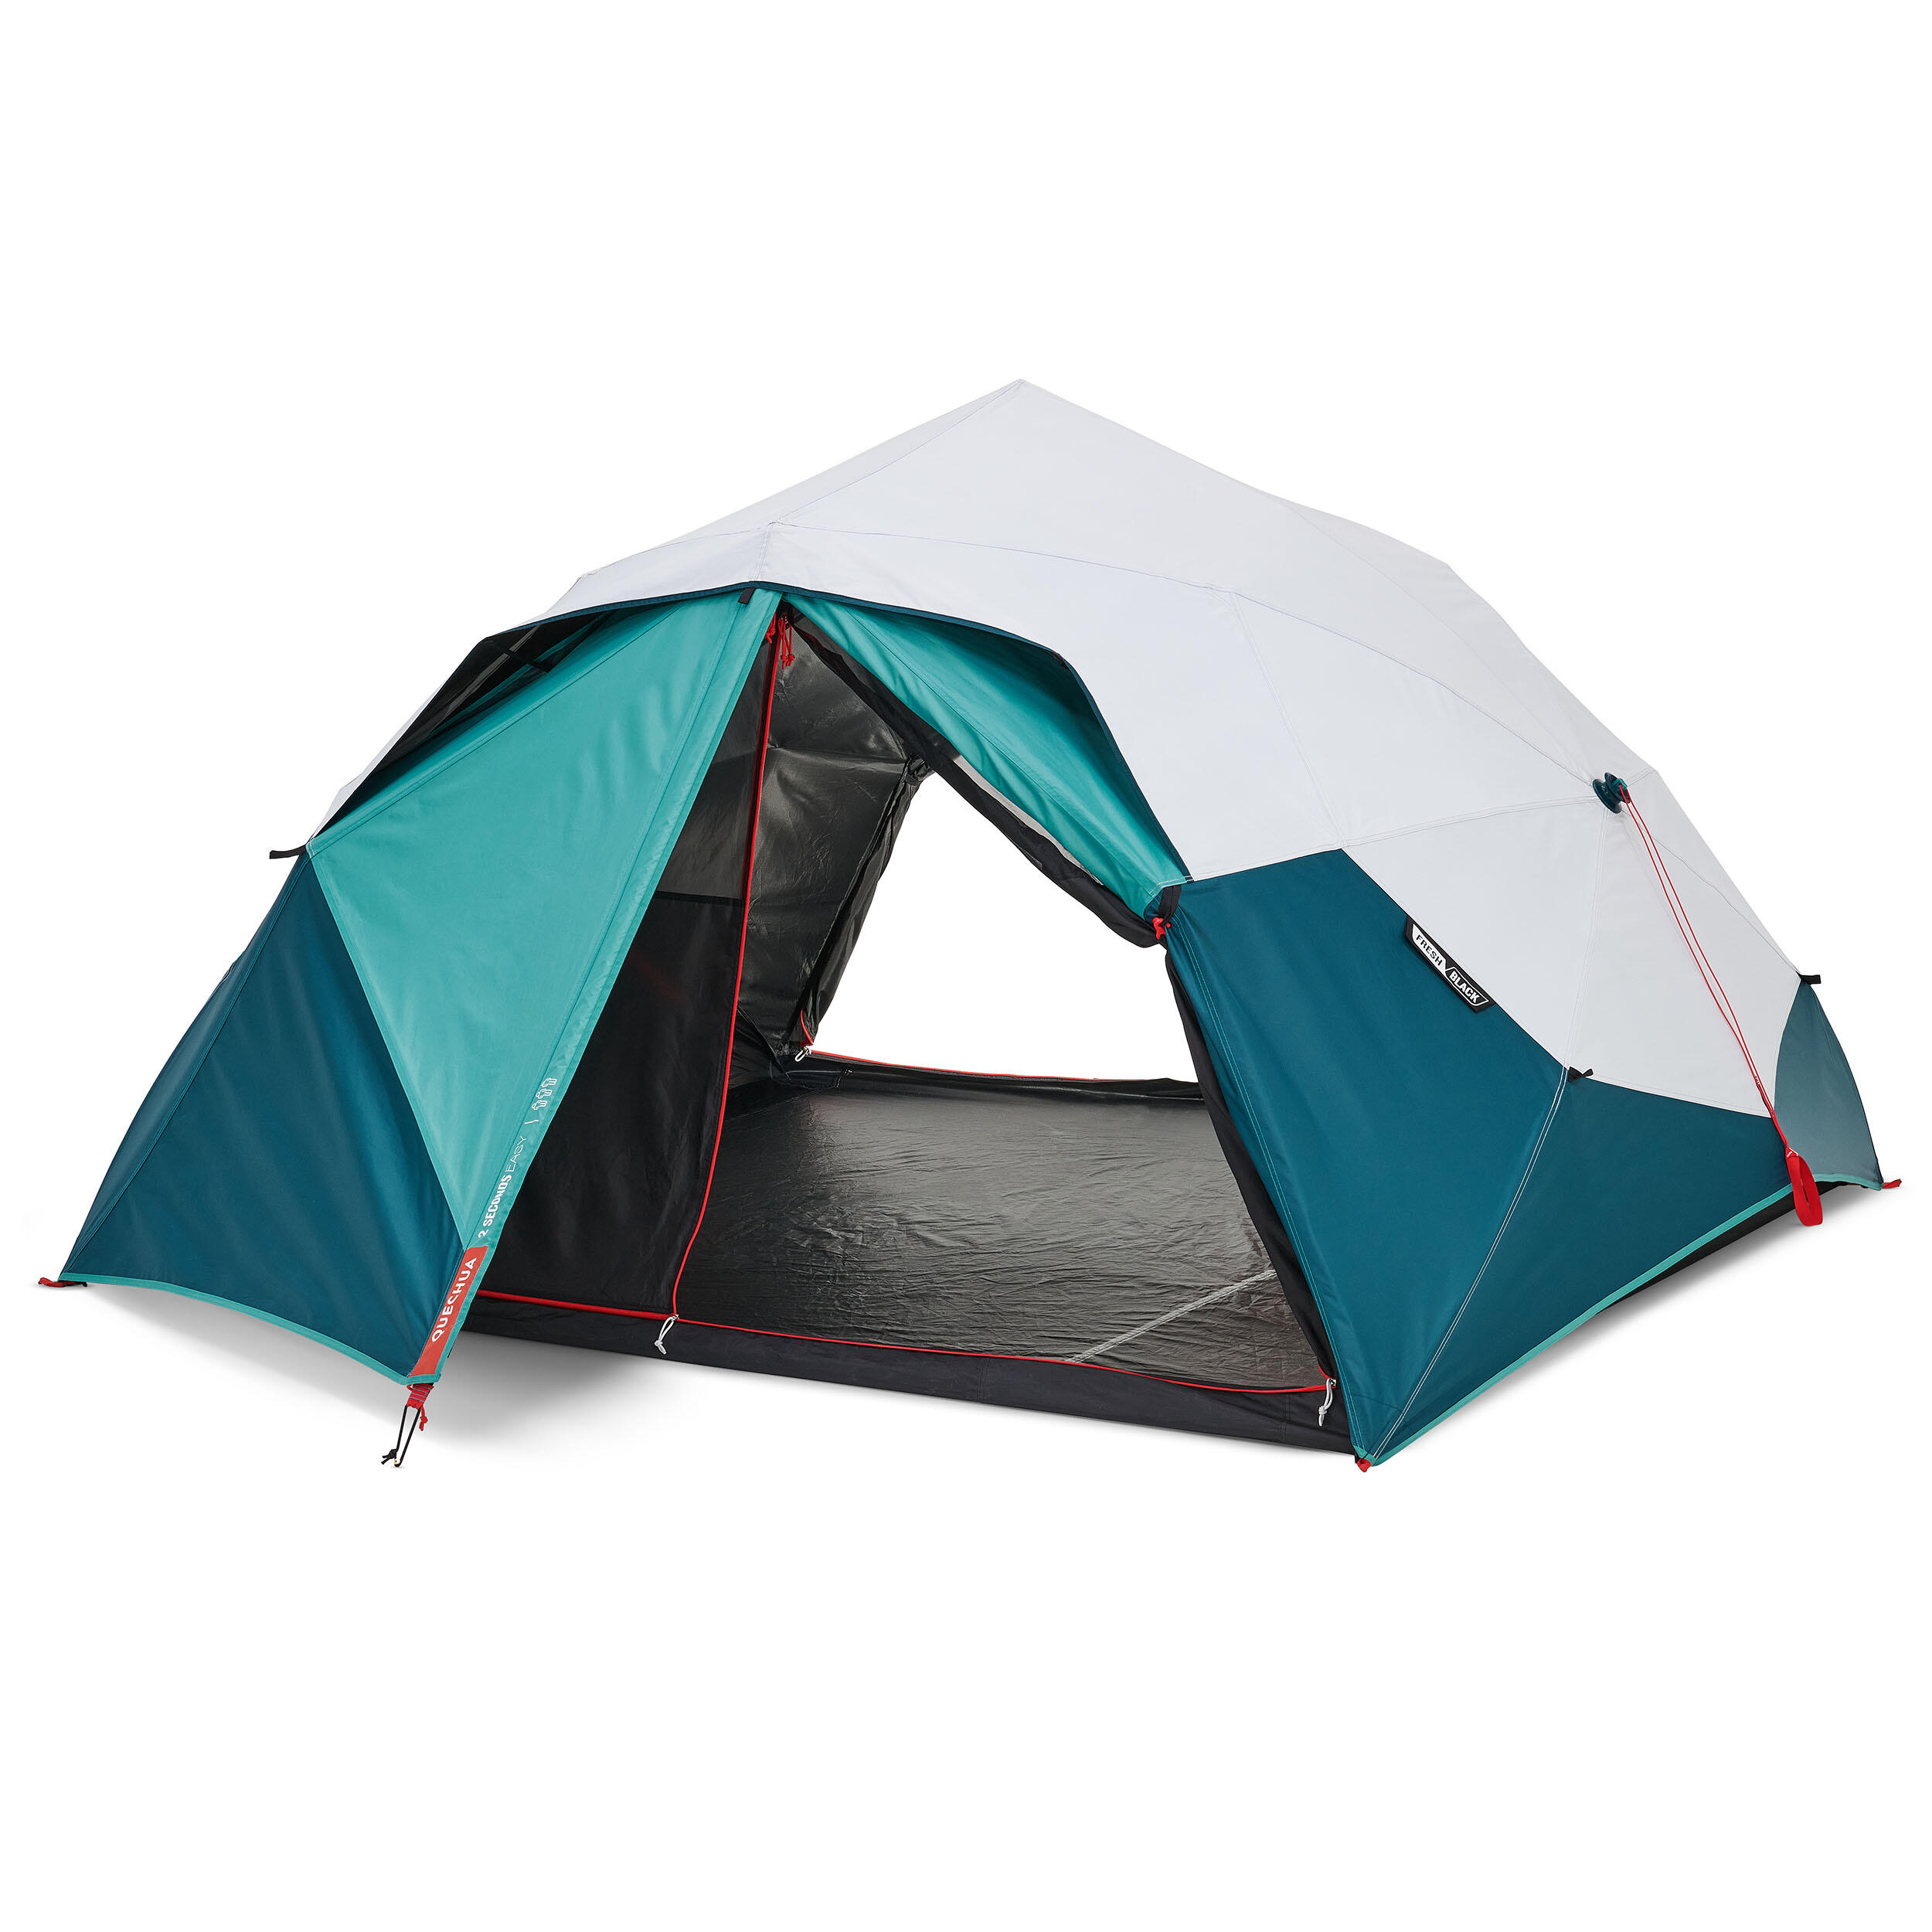 3-person 2 Seconds Easy Fresh & Black Camping Tent - Blue